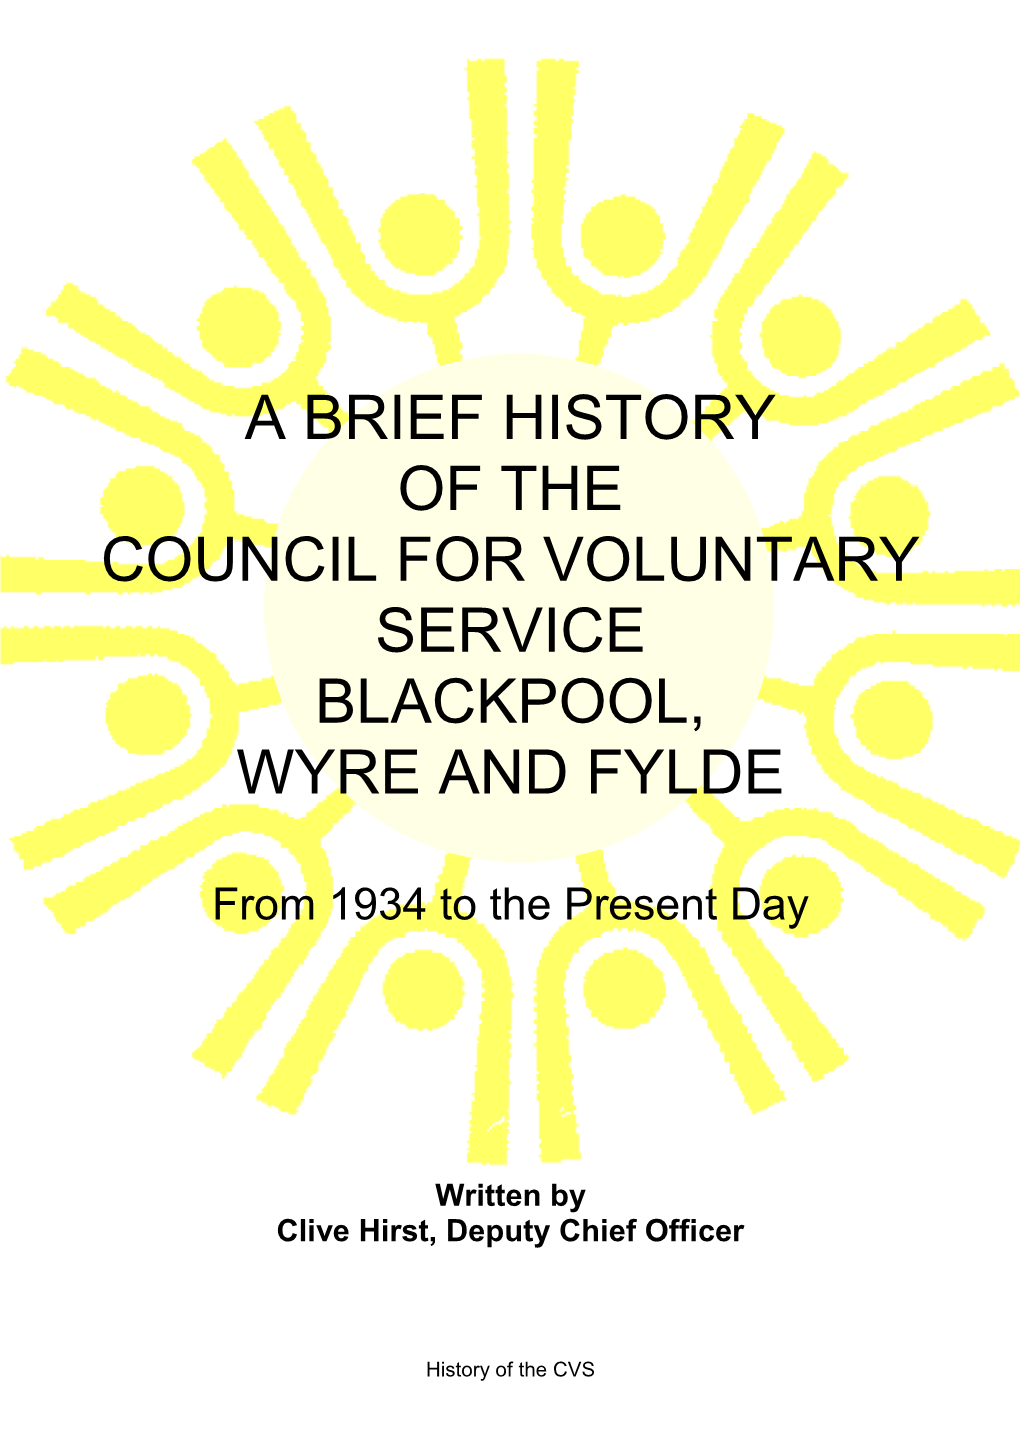 History of the Council for Voluntary Service Blackpool, Wyre and Fylde